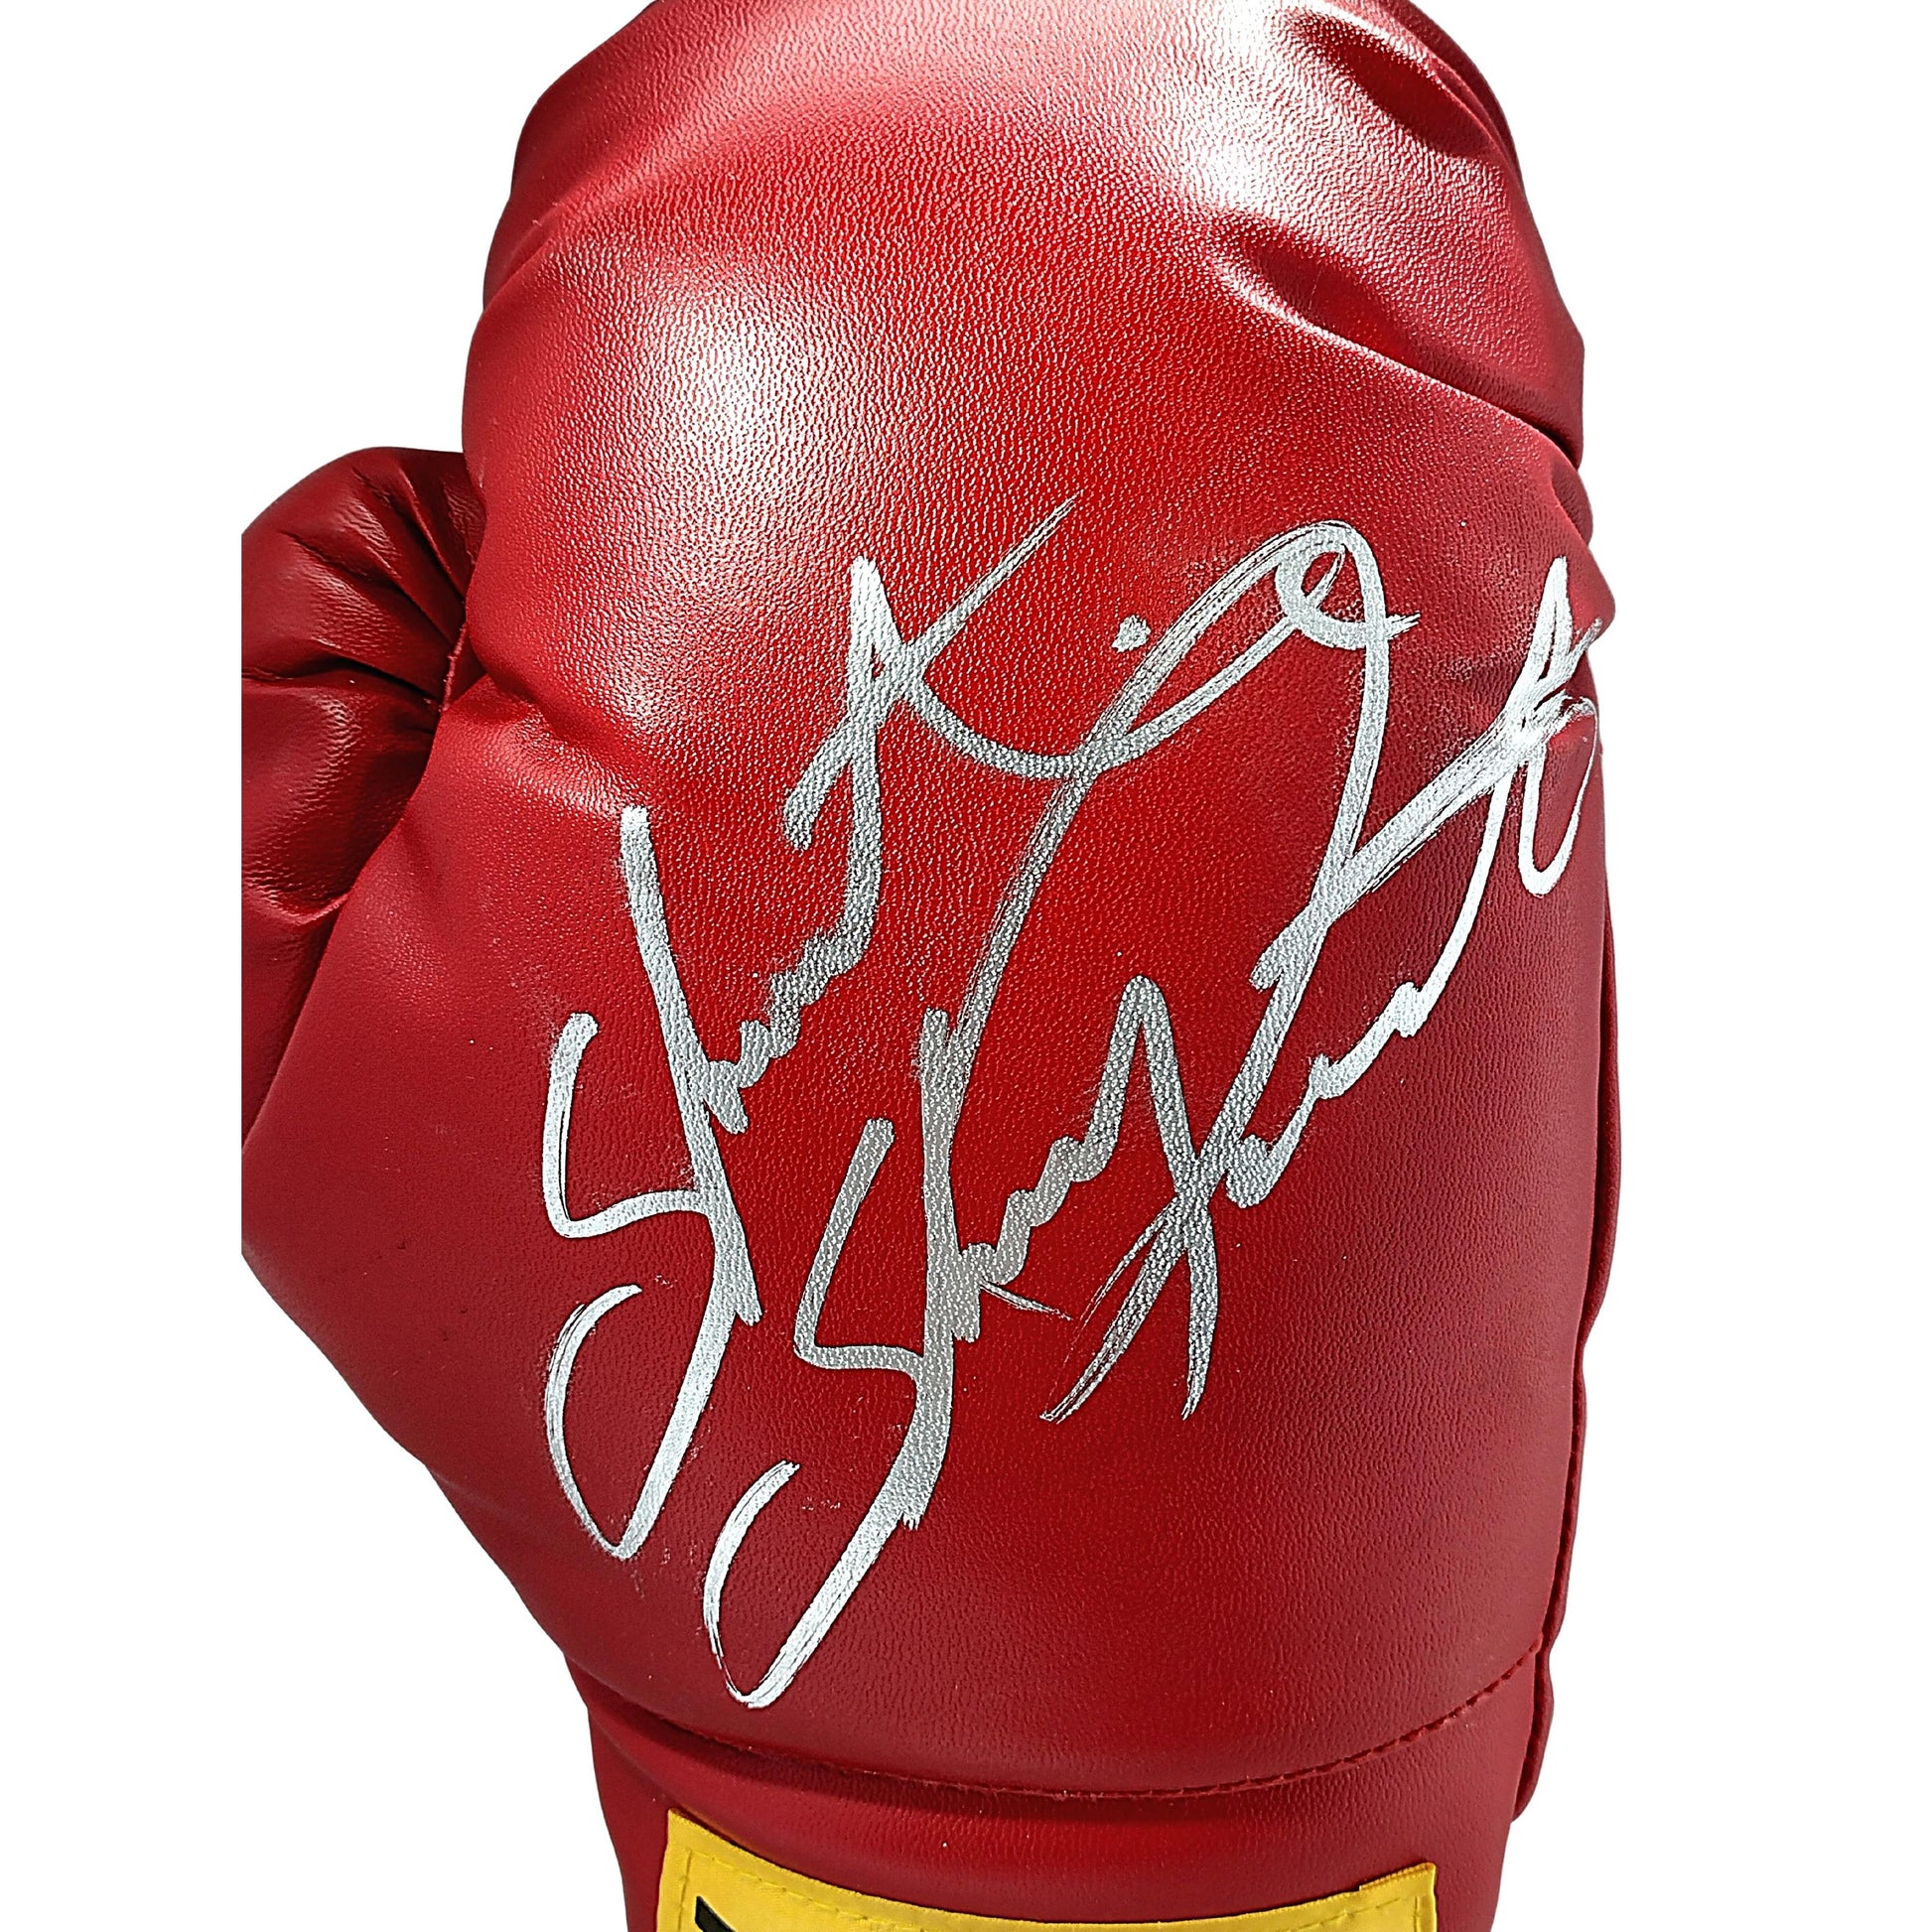 Boxing Gloves- Autographed- Shawn Porter Signed Red Everlast Boxing Glove Silver Signature Proof Photo Beckett Authentication 303